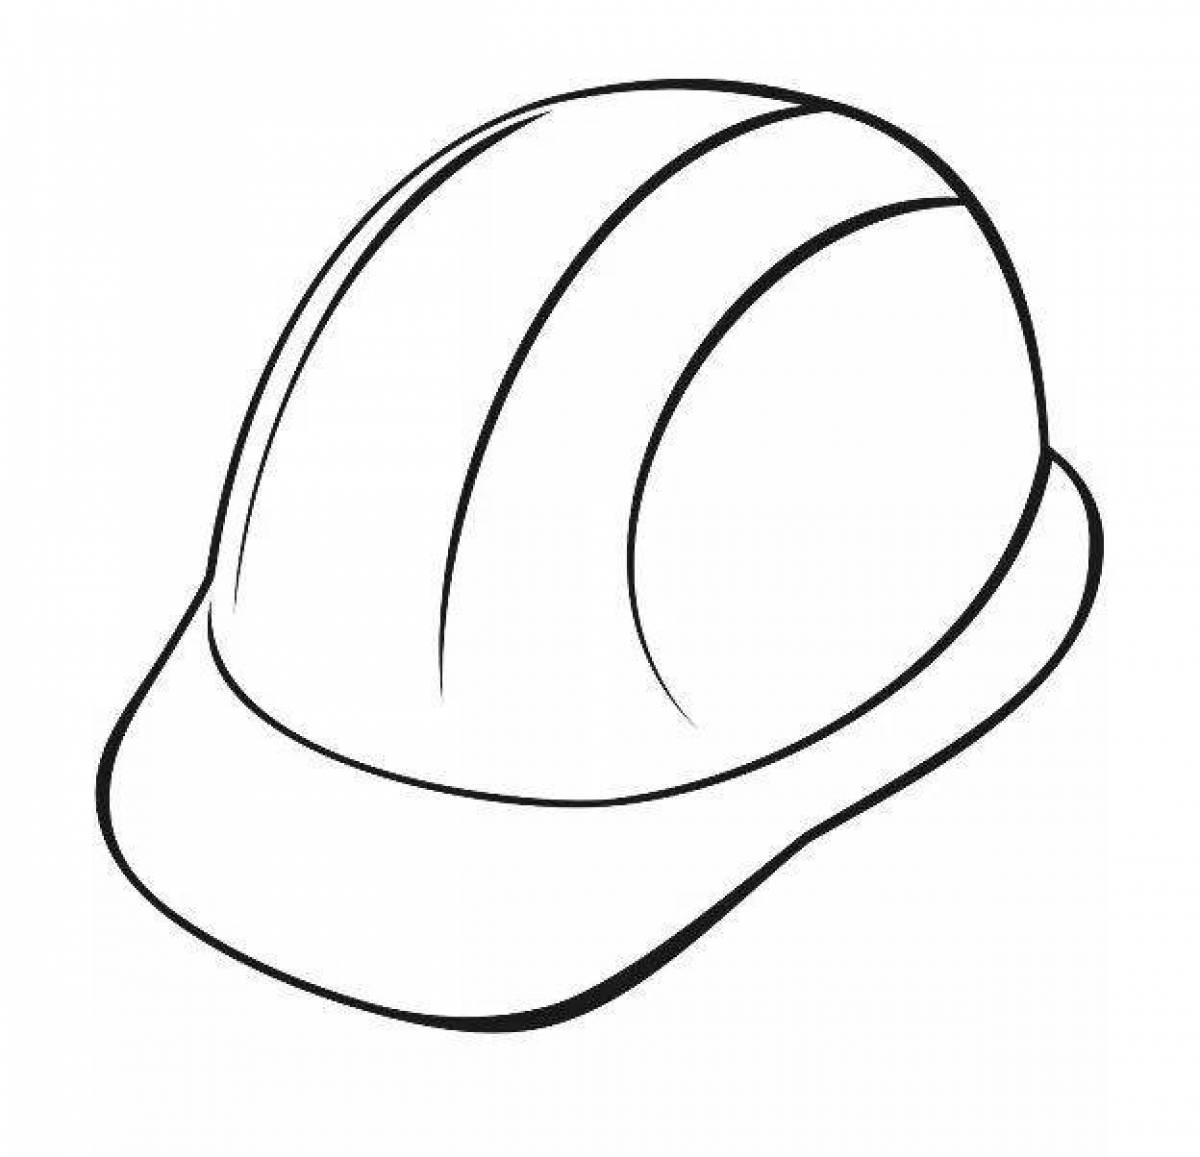 Coloring page charming helmet